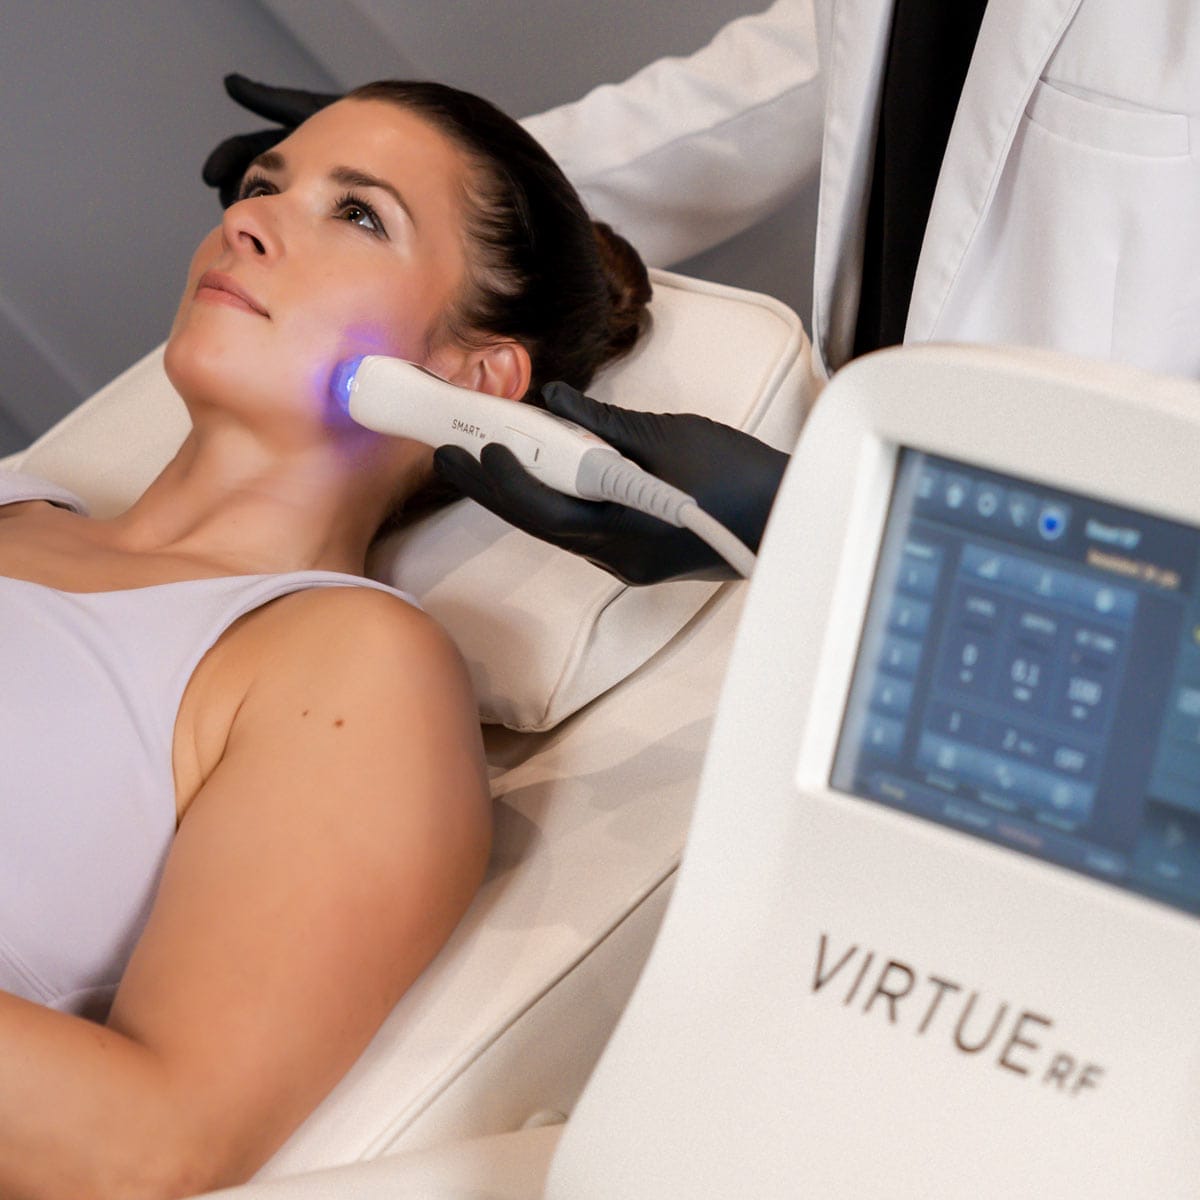 A woman is receiving a cutting-edge Virtue Exact RF Microneedling skin treatment on her face.